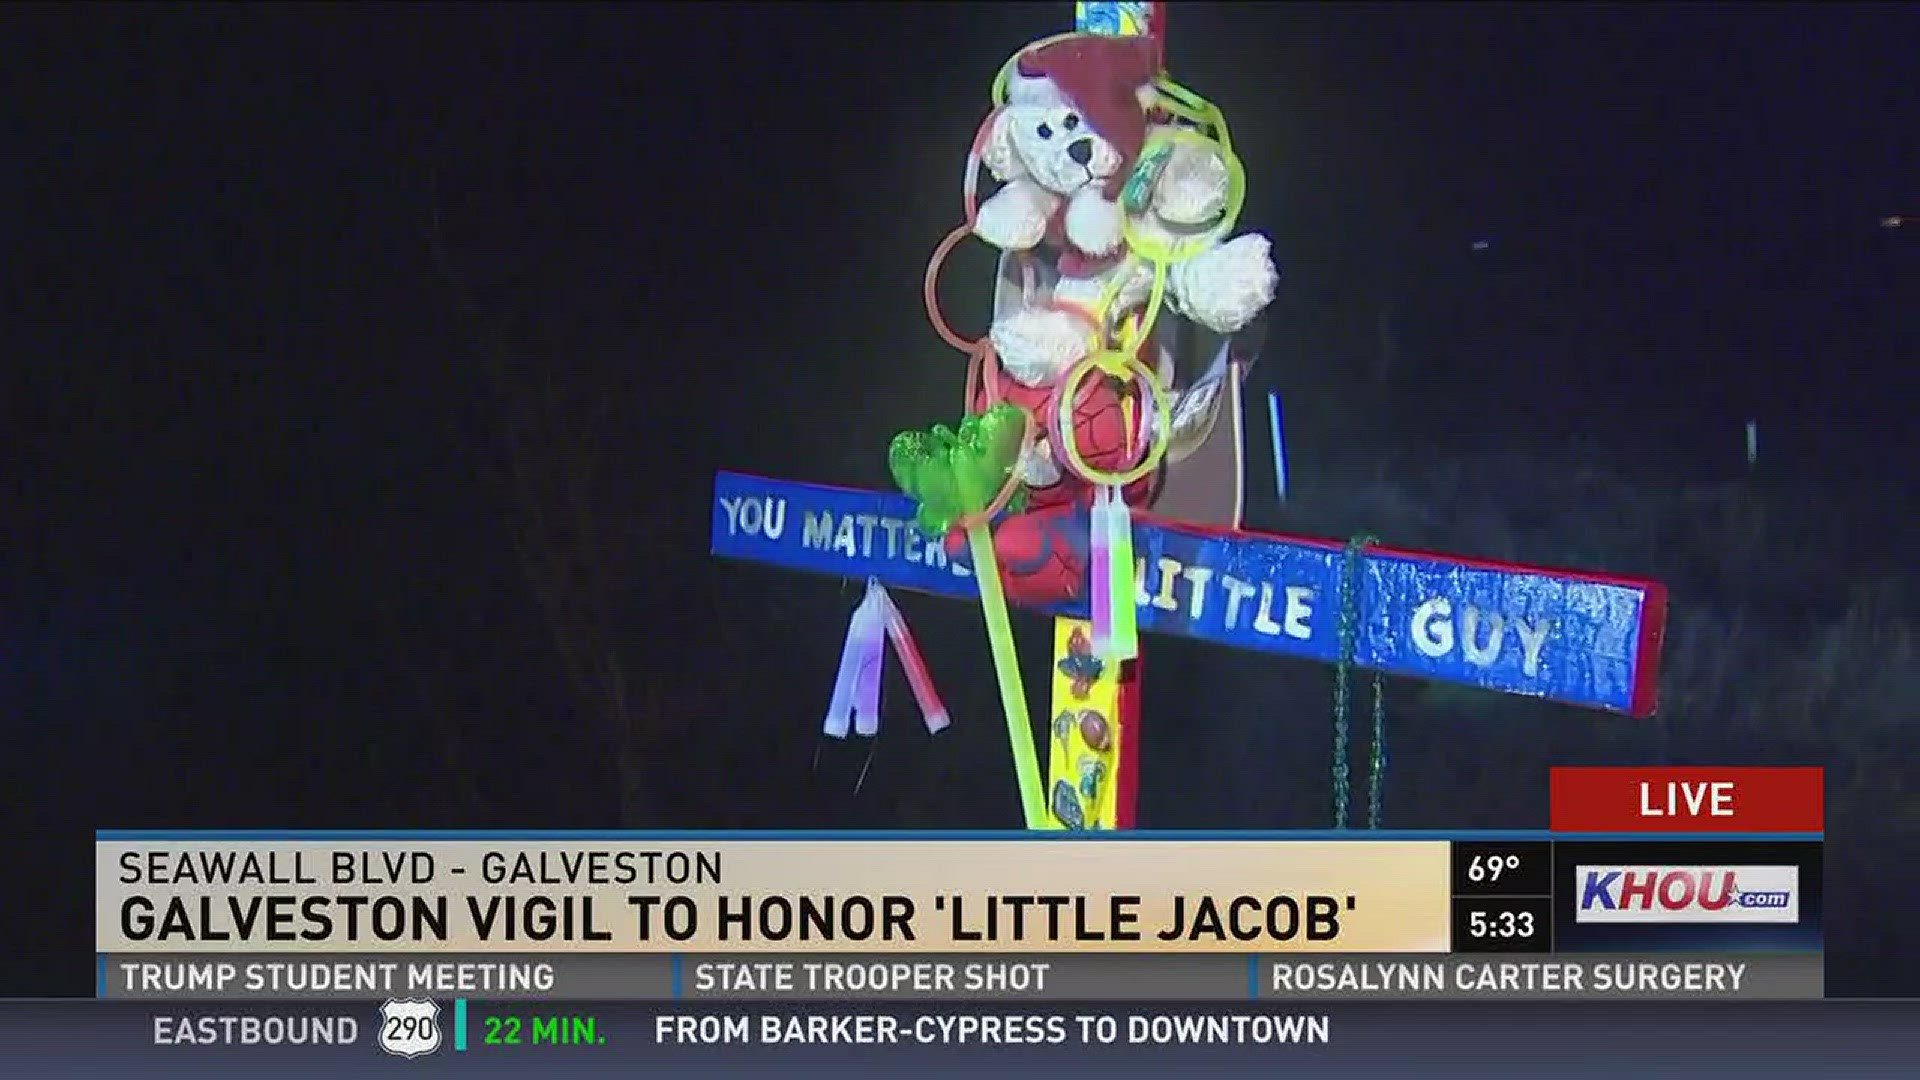 A toddler known as 'Little Jacob' was honored at the Galveston Seawall while questions remain over his identity and death.